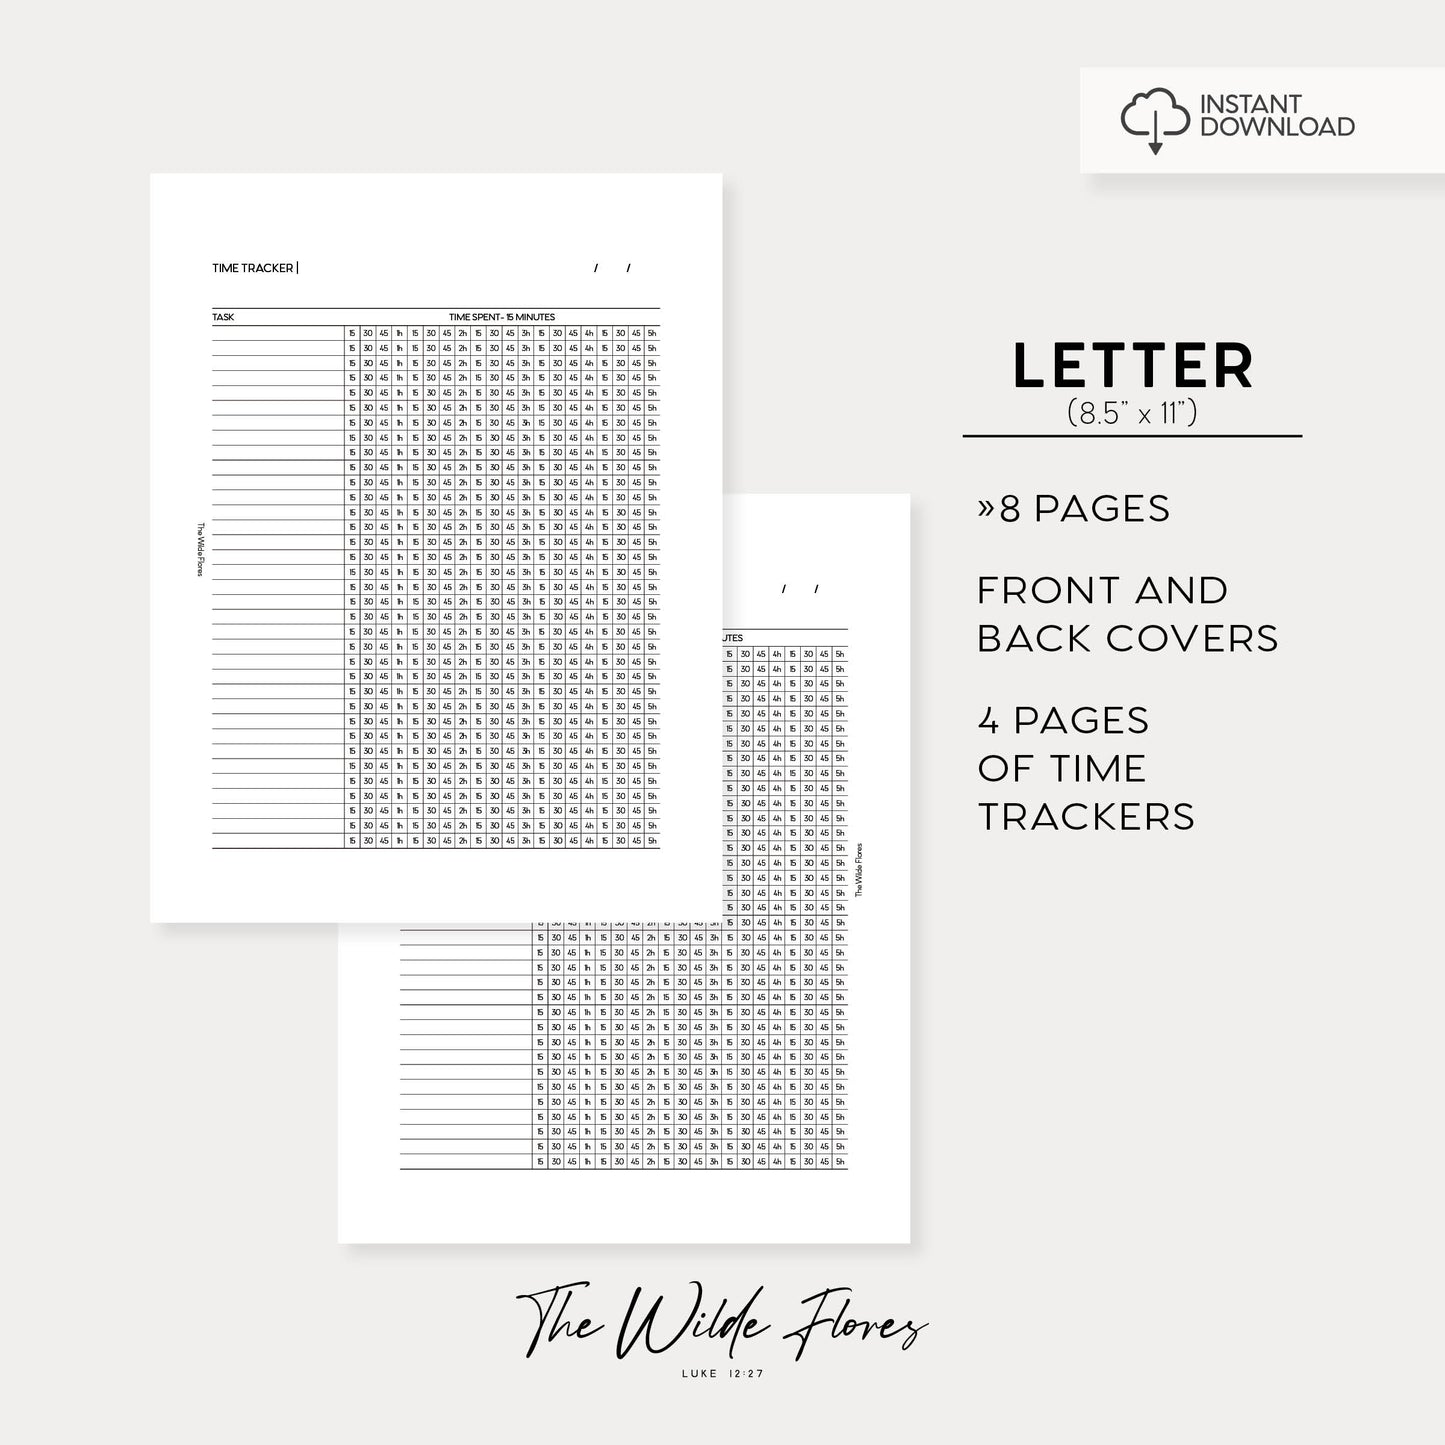 15 Minute Time Tracker: Letter Size Printable